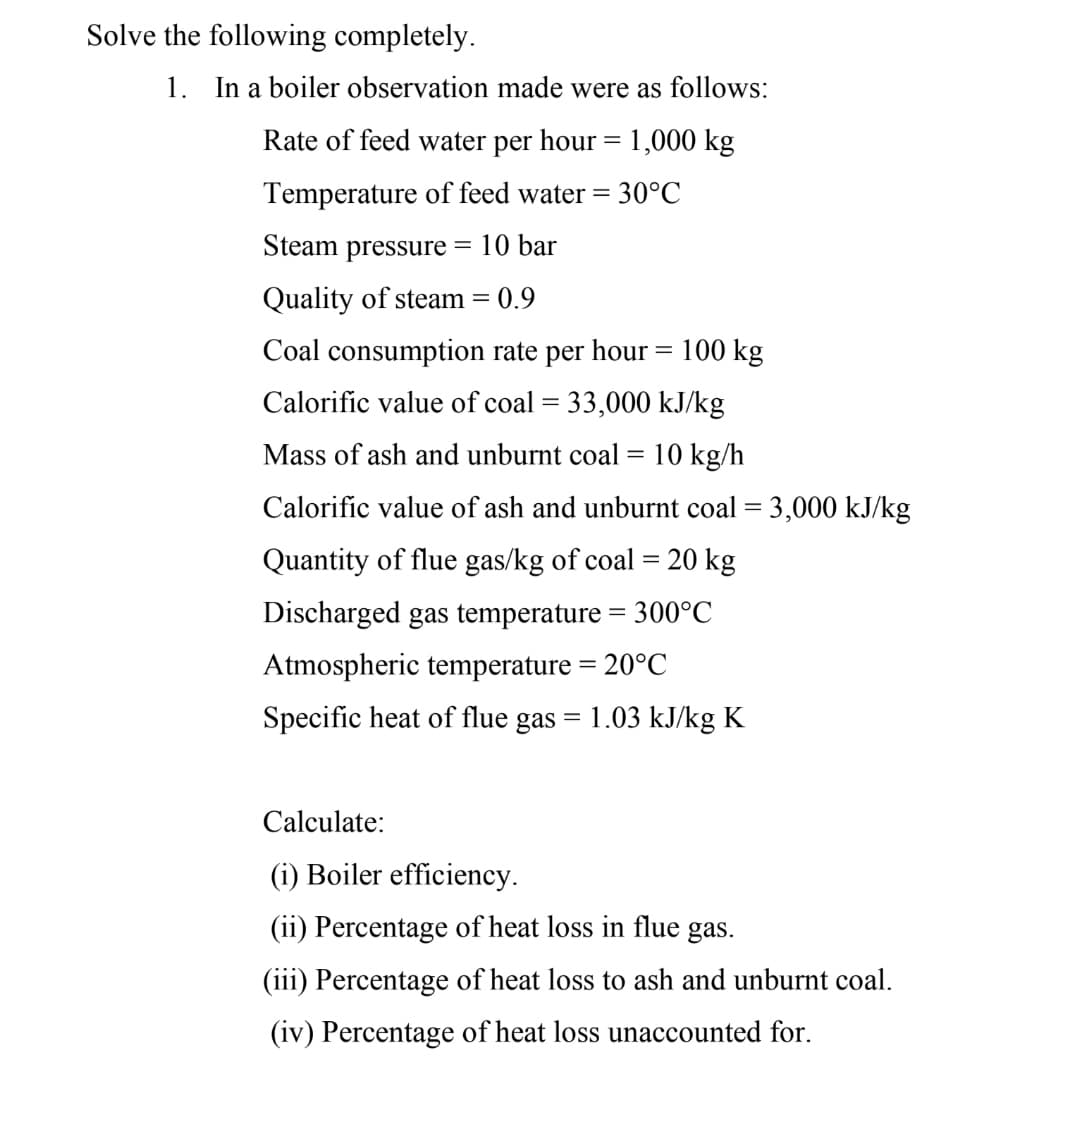 Solve the following completely.
1. In a boiler observation made were as follows:
Rate of feed water per hour = 1,000 kg
Temperature of feed water =
30°C
Steam pressure
= 10 bar
Quality of steam = 0.9
Coal consumption rate per hour = 100 kg
Calorific value of coal = 33,000 kJ/kg
Mass of ash and unburnt coal= 10 kg/h
Calorific value of ash and unburnt coal = 3,000 kJ/kg
Quantity of flue gas/kg of coal = 20 kg
%3D
Discharged gas temperature = 300°C
Atmospheric temperature = 20°C
Specific heat of flue gas = 1.03 kJ/kg K
Calculate:
(i) Boiler efficiency.
(ii) Percentage of heat loss in flue gas.
(iii) Percentage of heat loss to ash and unburnt coal.
(iv) Percentage of heat loss unaccounted for.
